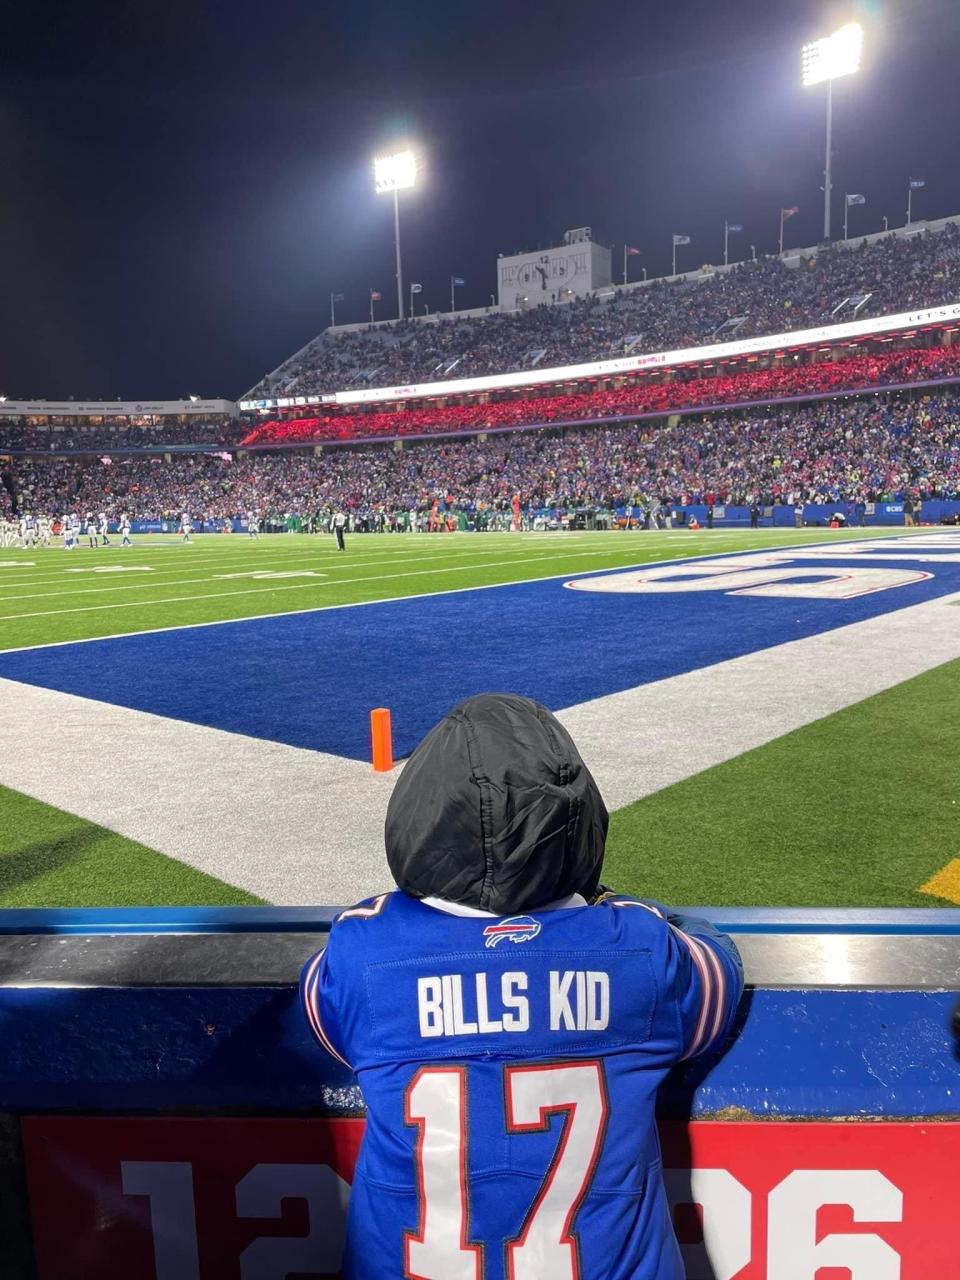 Carson Gaspar, 7, the self-proclaimed "Bills Kid" whose weekly YouTube videos pump up the Bills Mafia fanbase, at a game earlier this season. He and his family were watching the "Monday Night Football" game between the Bills and the Bengals on Jan. 2, 2023, when Bills safety Damar Hamlin went into cardiac arrest after what appeared to be a routine tackle. The NFL suspended the game after Hamlin was taken by ambulance to a Cincinnati trauma center.